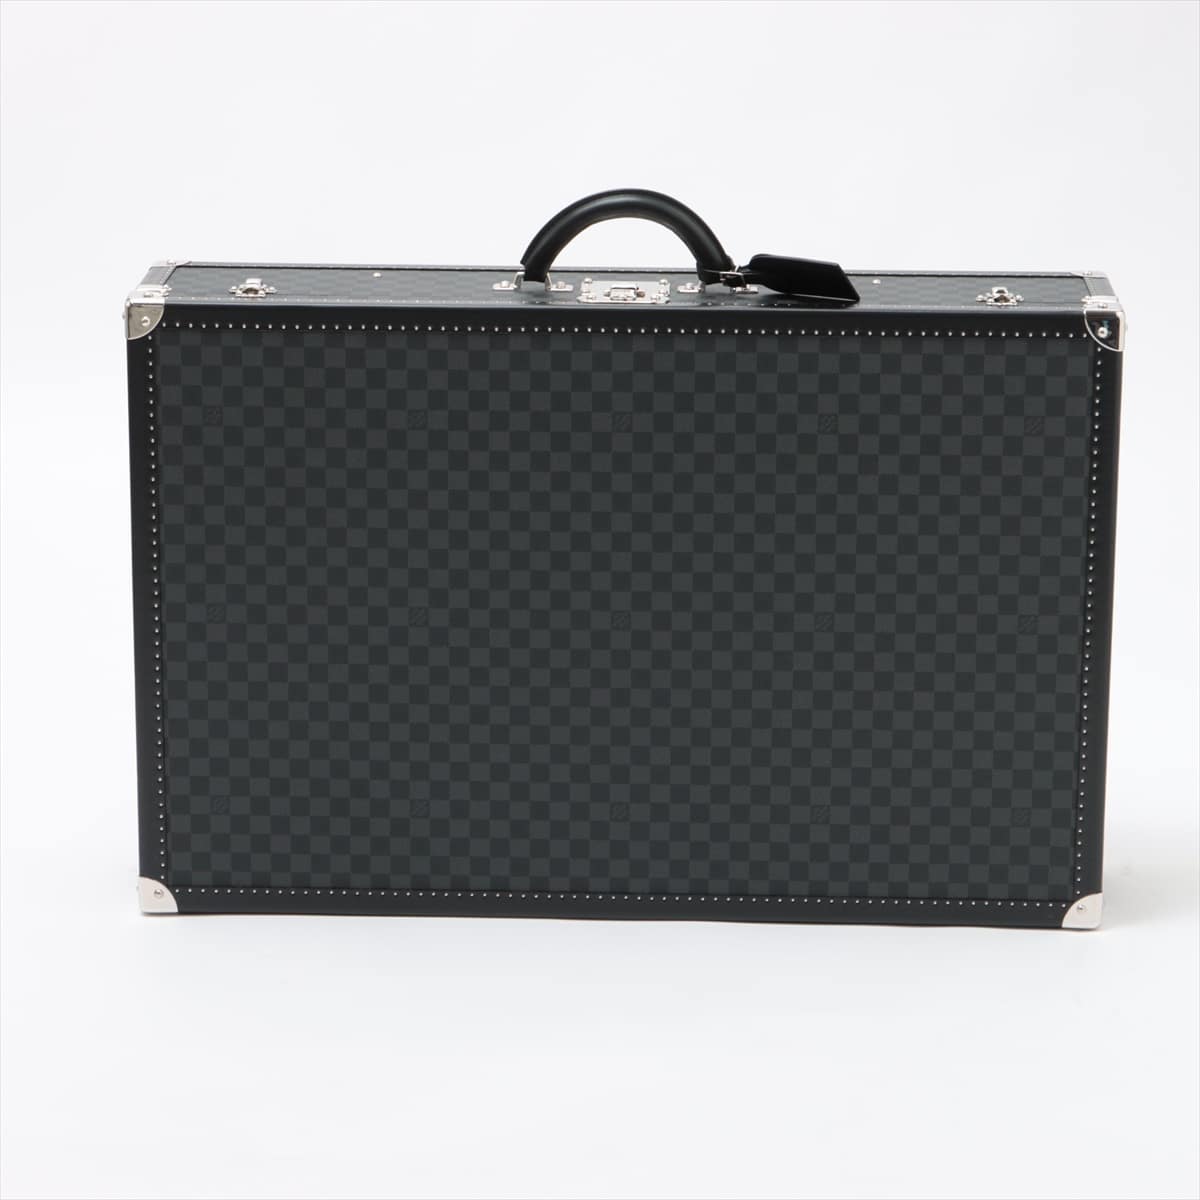 Louis Vuitton Damier graphite VISTEN 80 model number unknown There is a name engraved